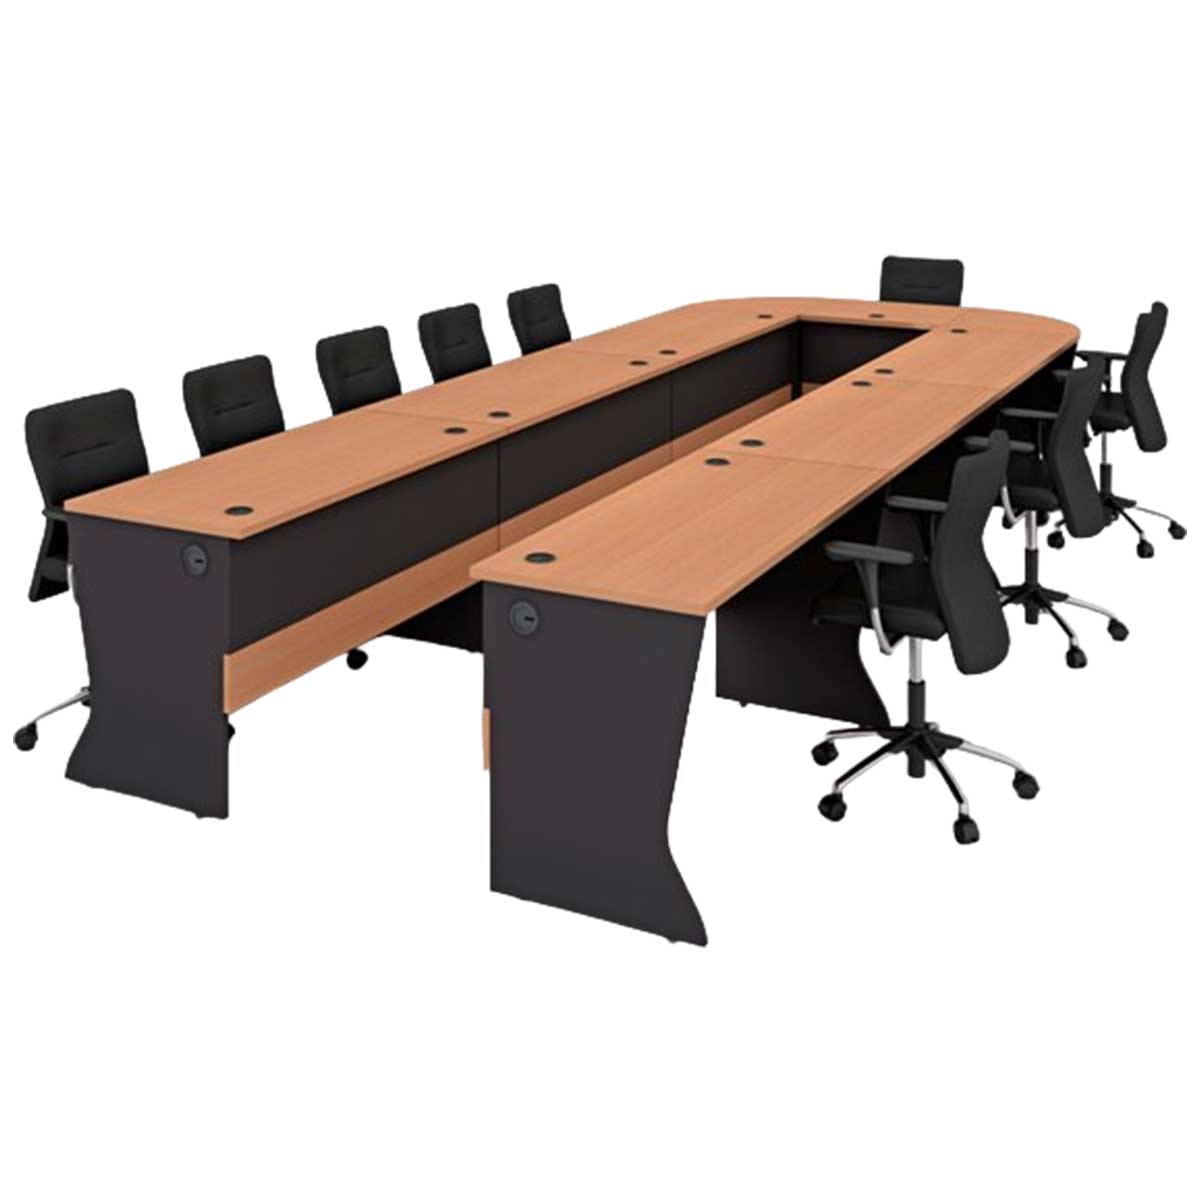 Collaborative Table Manufacturers, Suppliers, Exporters in Delhi 